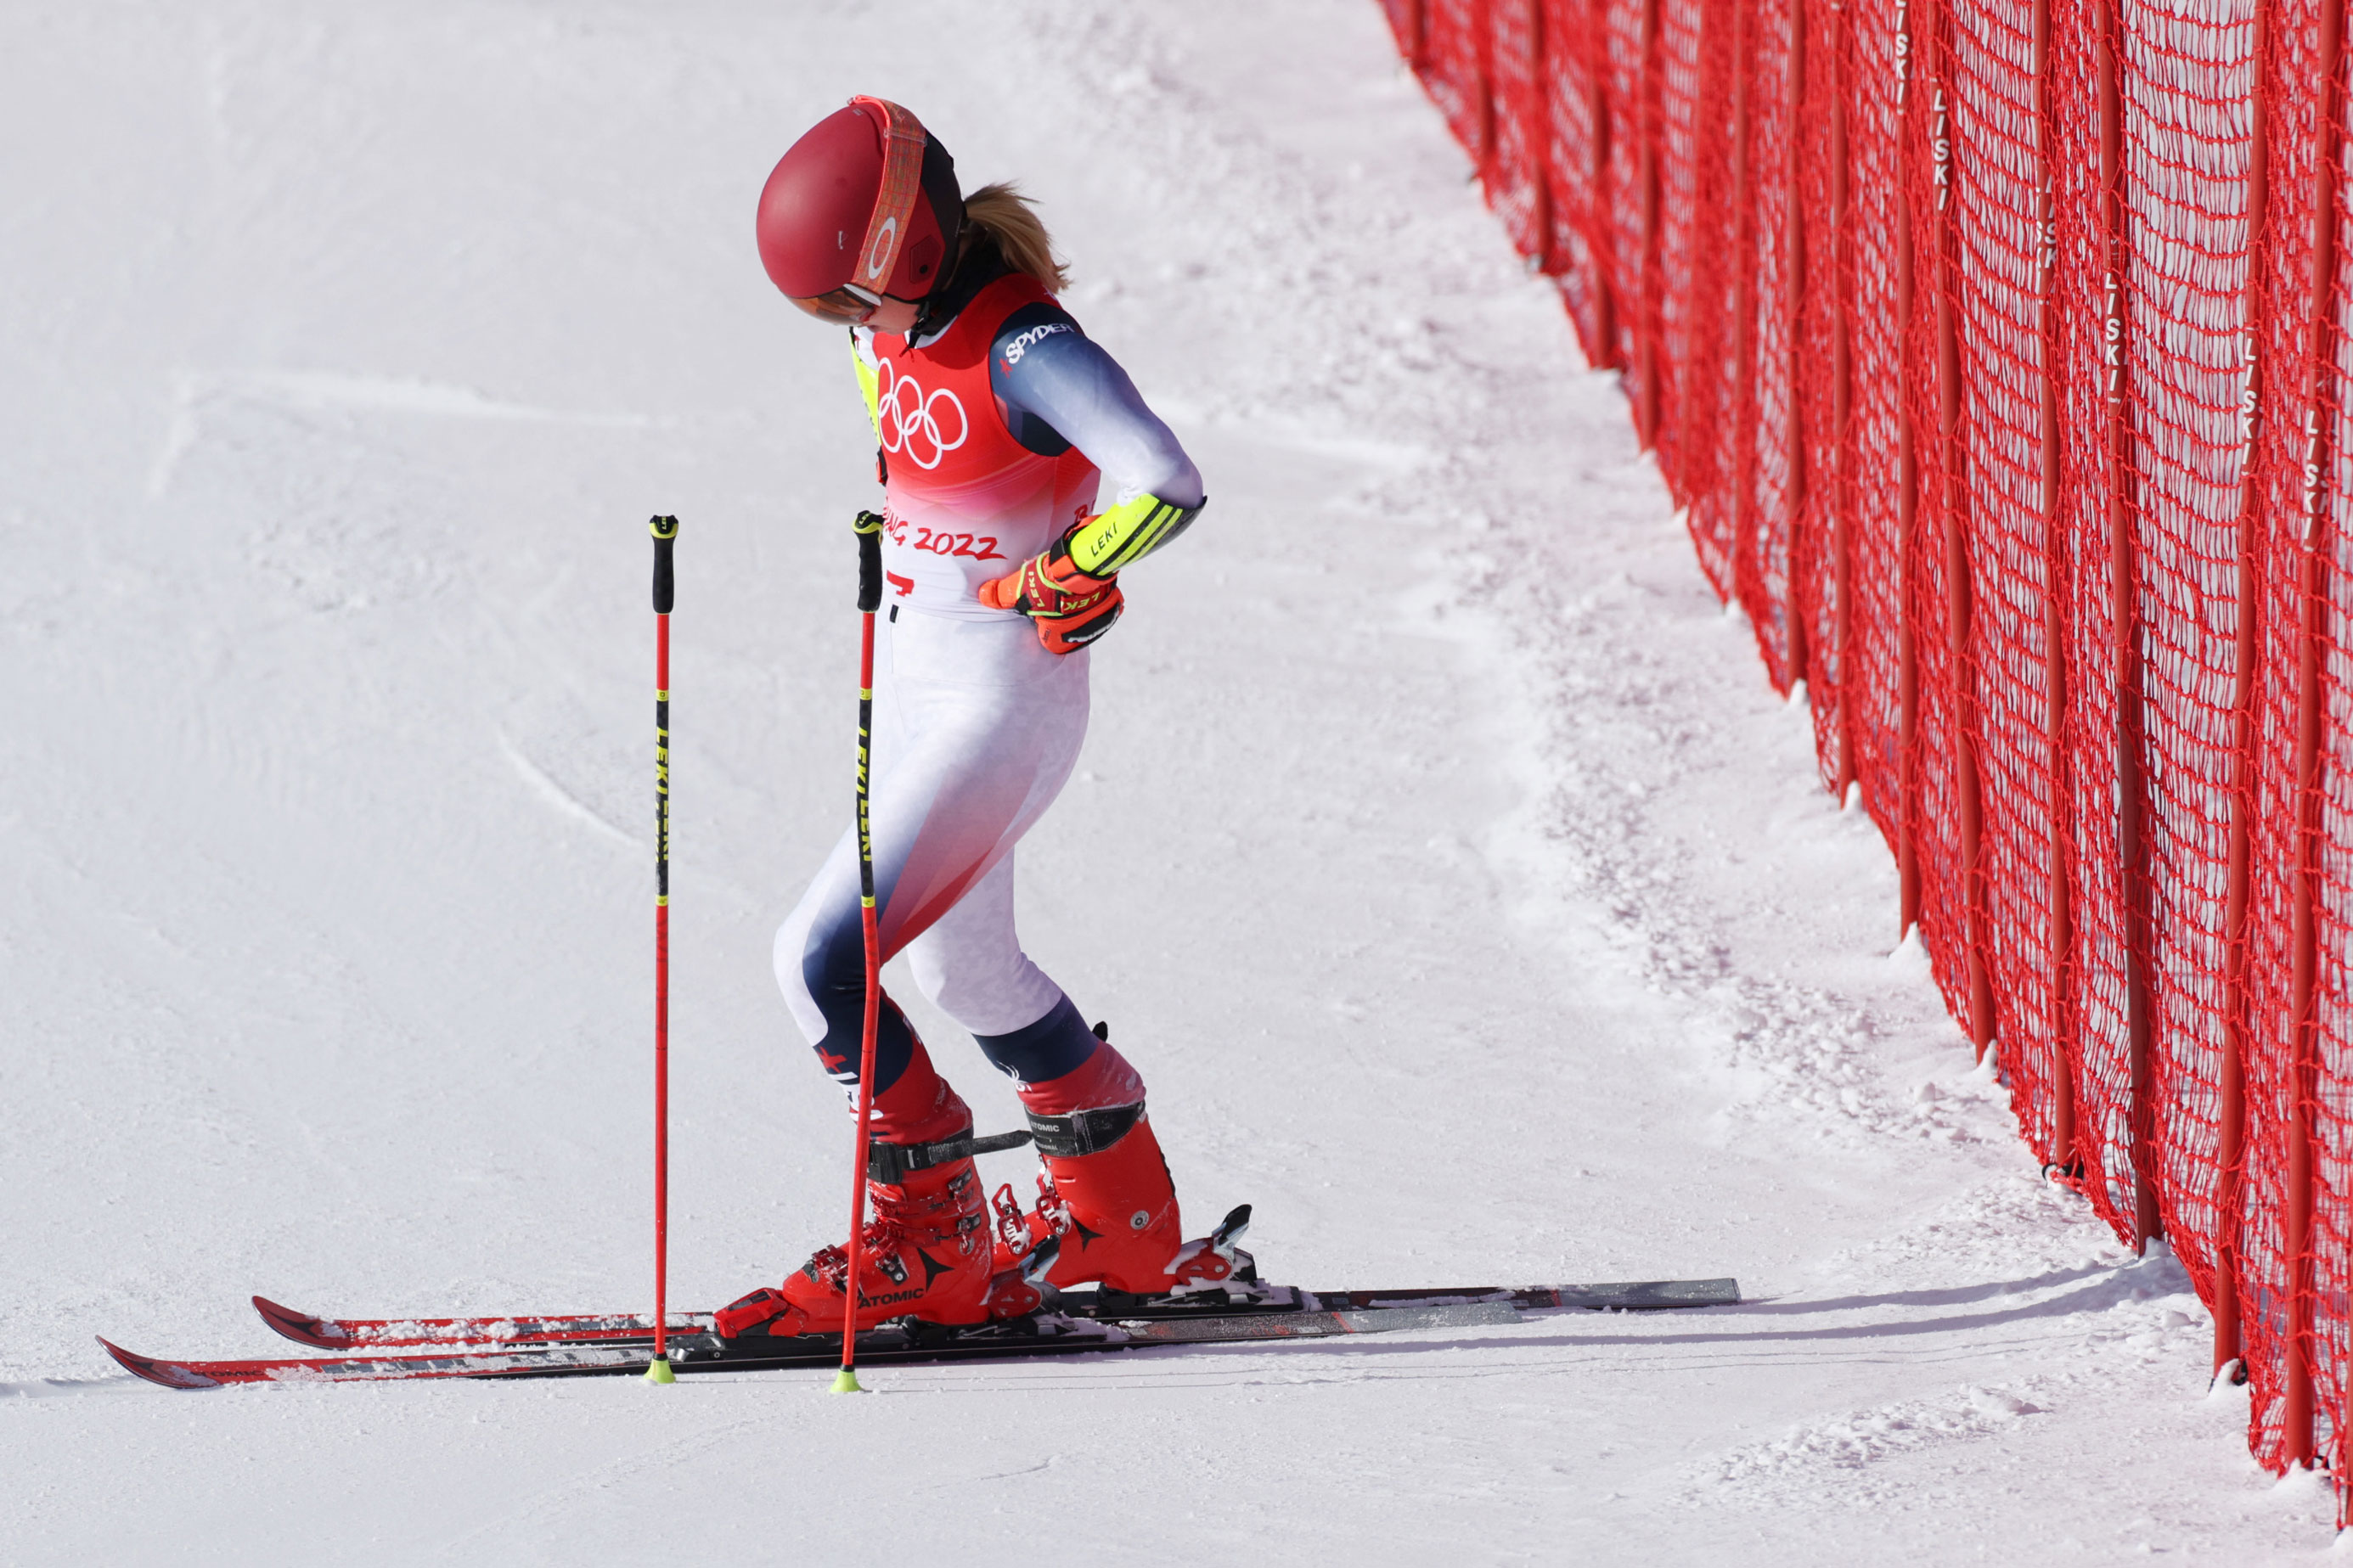 American skiing star Mikaela Shiffrin reacts after not finishing her run during the women's giant slalom.